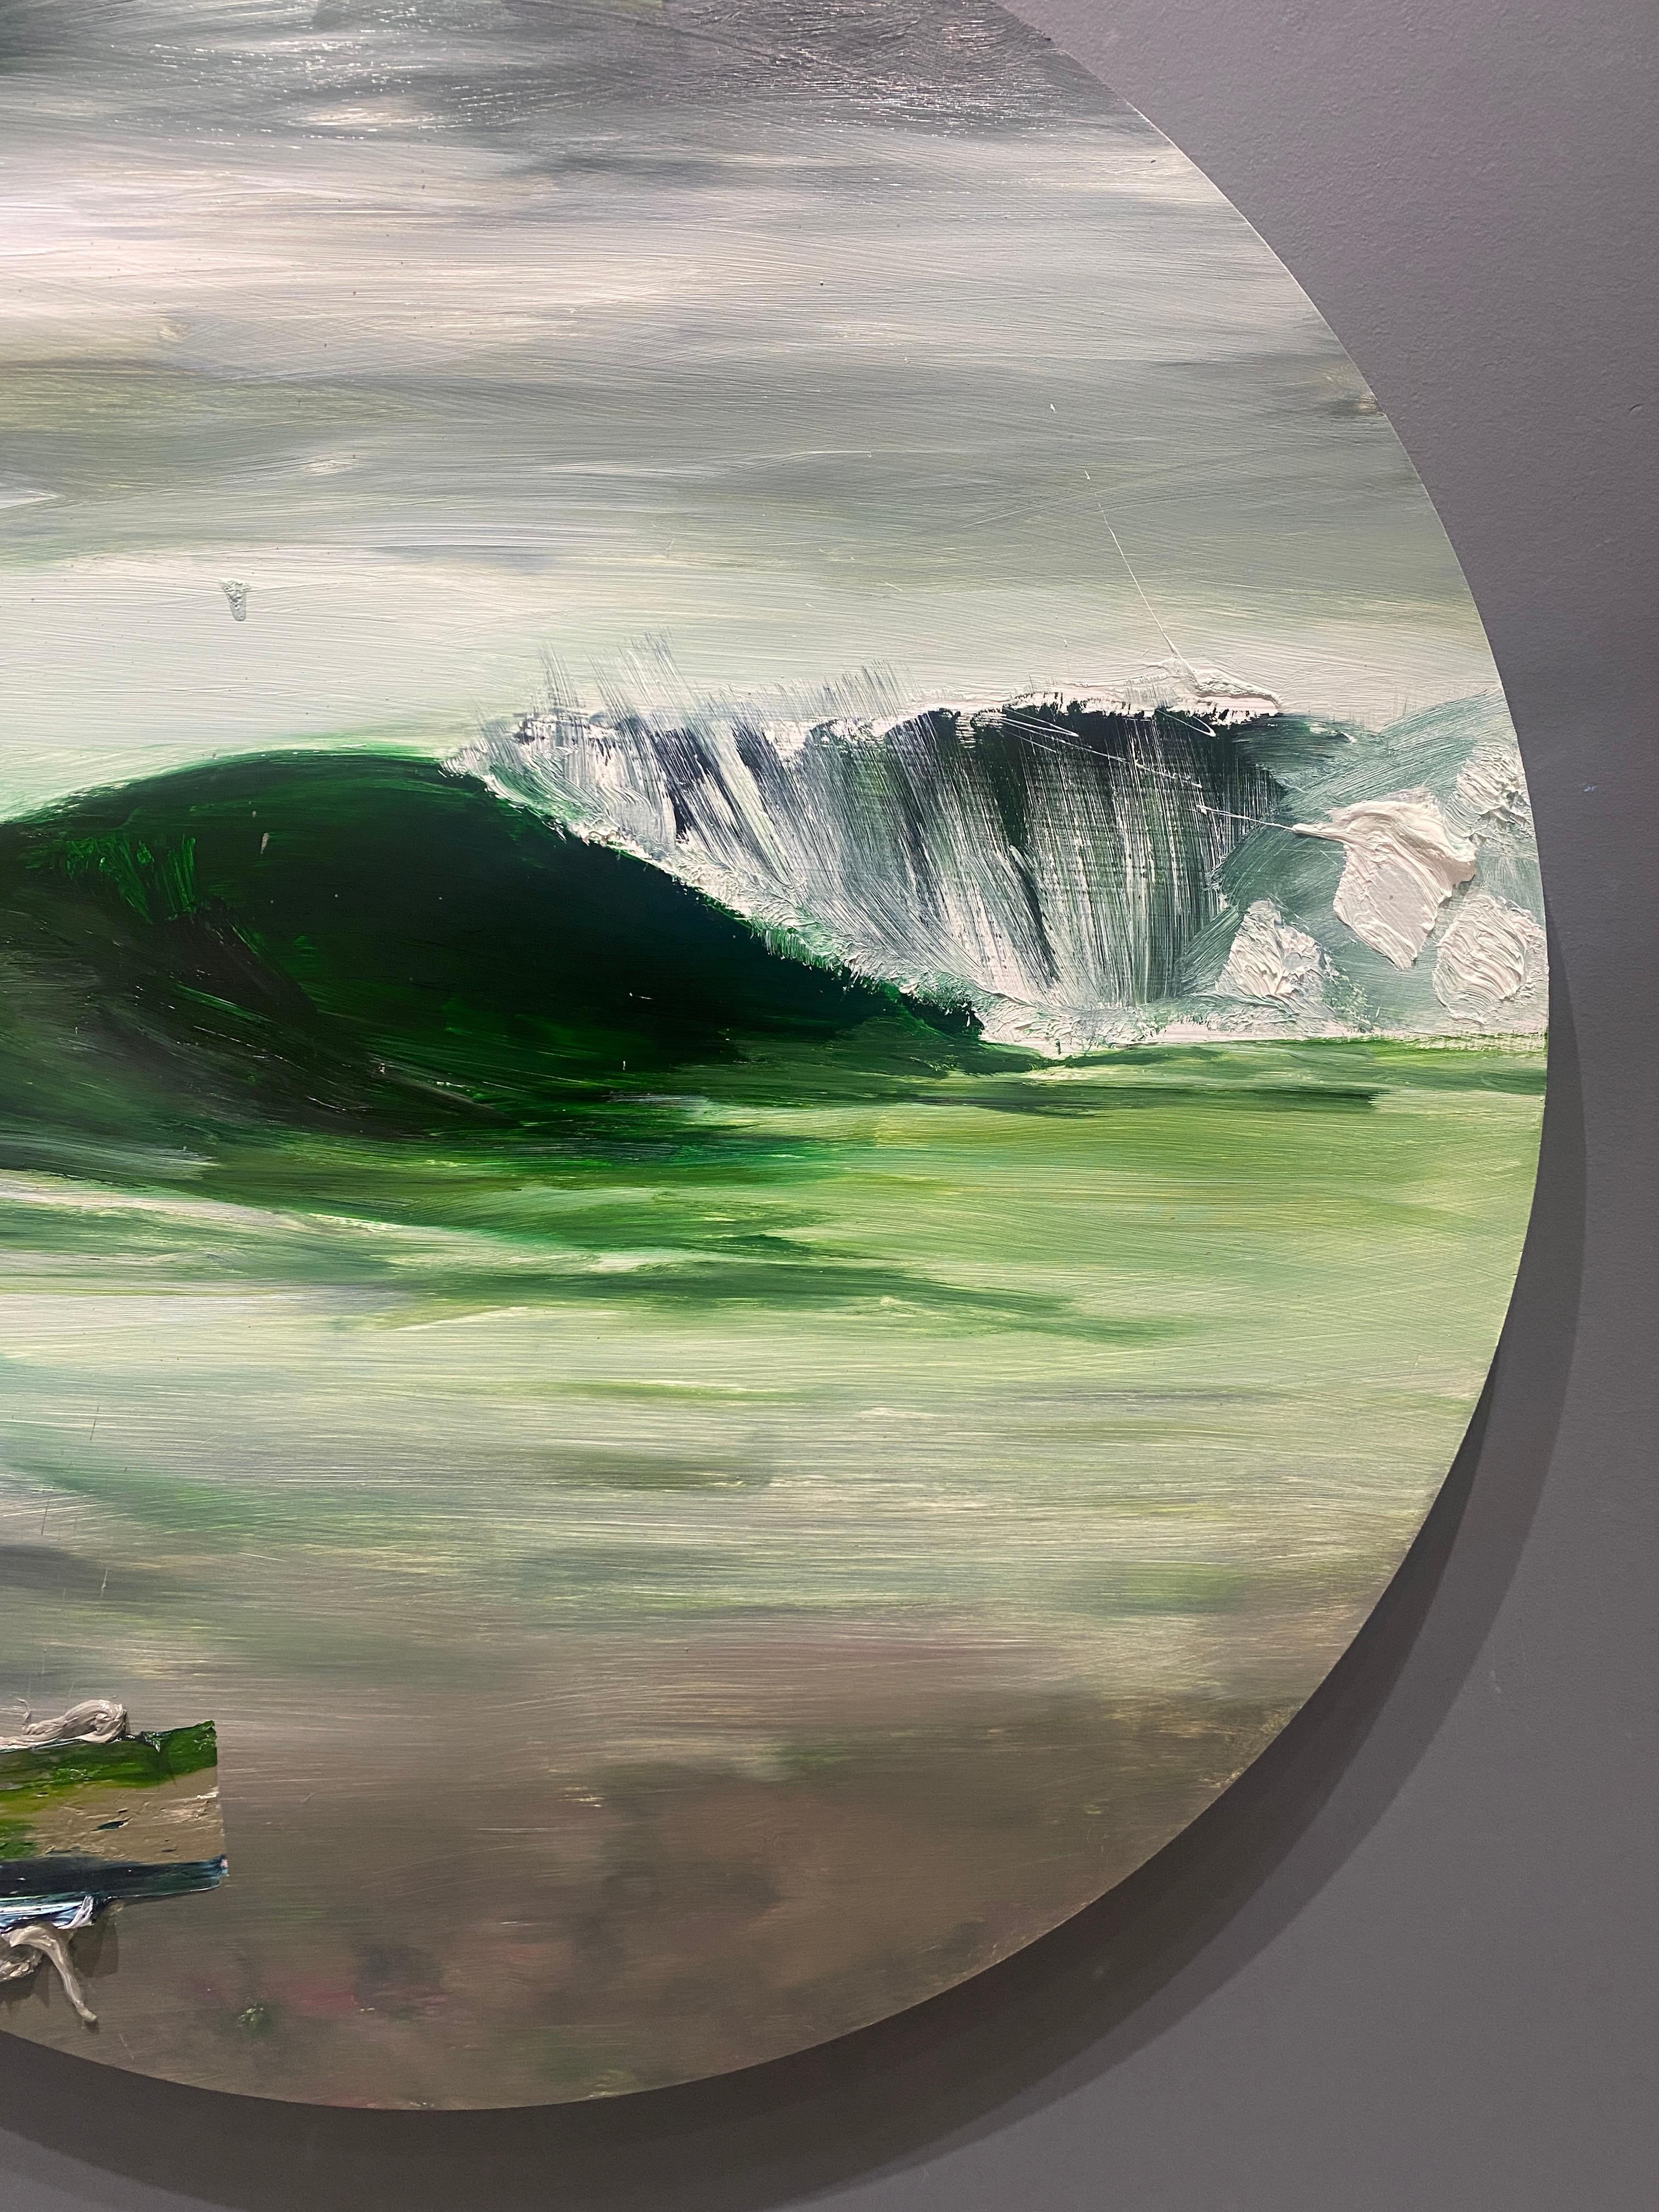 Yektai captures the transient shapes and textures of the Atlantic's waves that, as a surfer, Yektai is particularly attuned to. The circular canvas is a reminder of the cyclical nature of the ocean, and also resembles a porthole window.

Artist